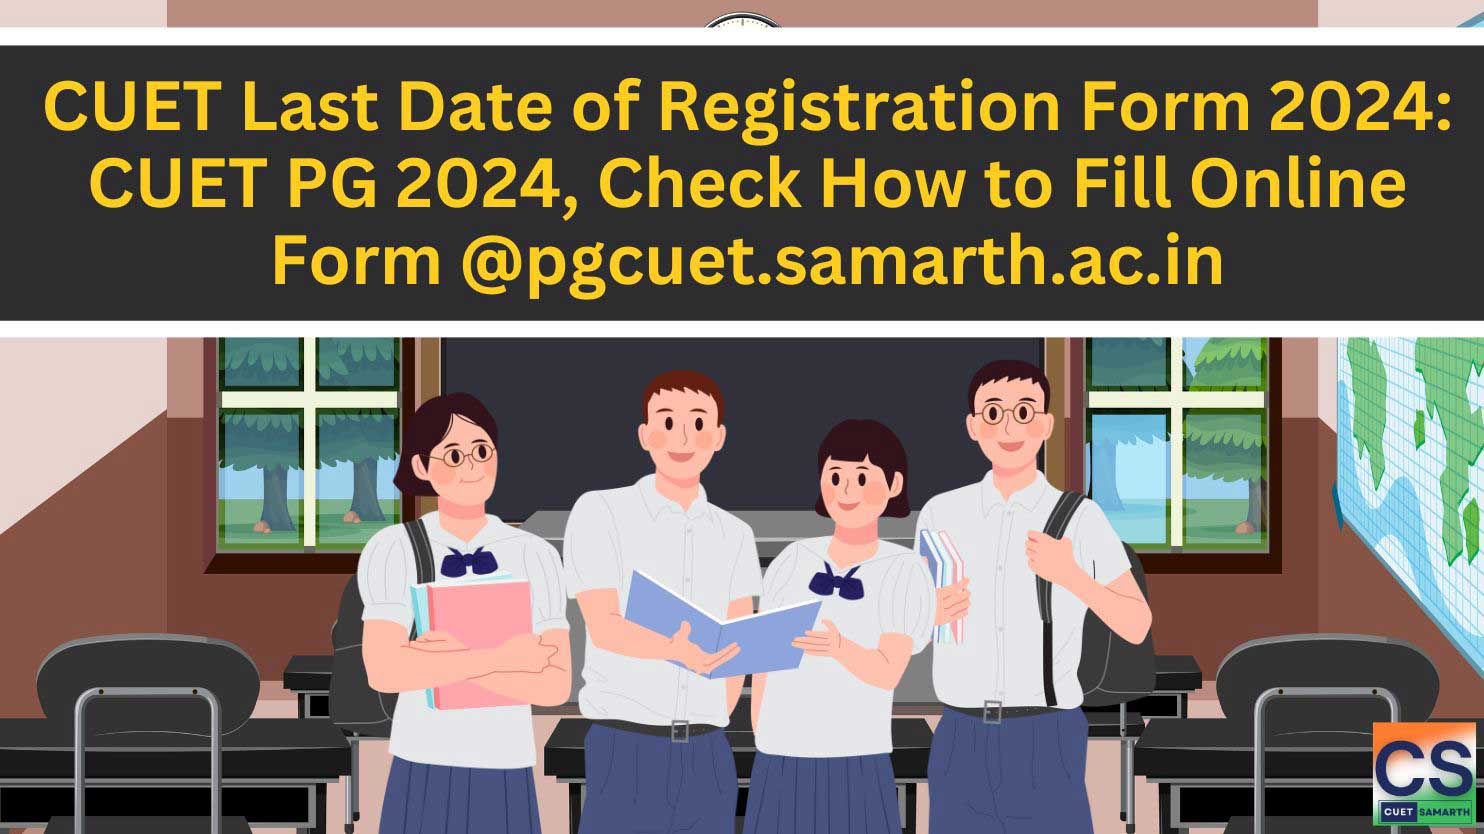 CUET Last Date of Registration Form 2024: CUET PG 2024, Check How to Fill Online Form @pgcuet.samarth.ac.in